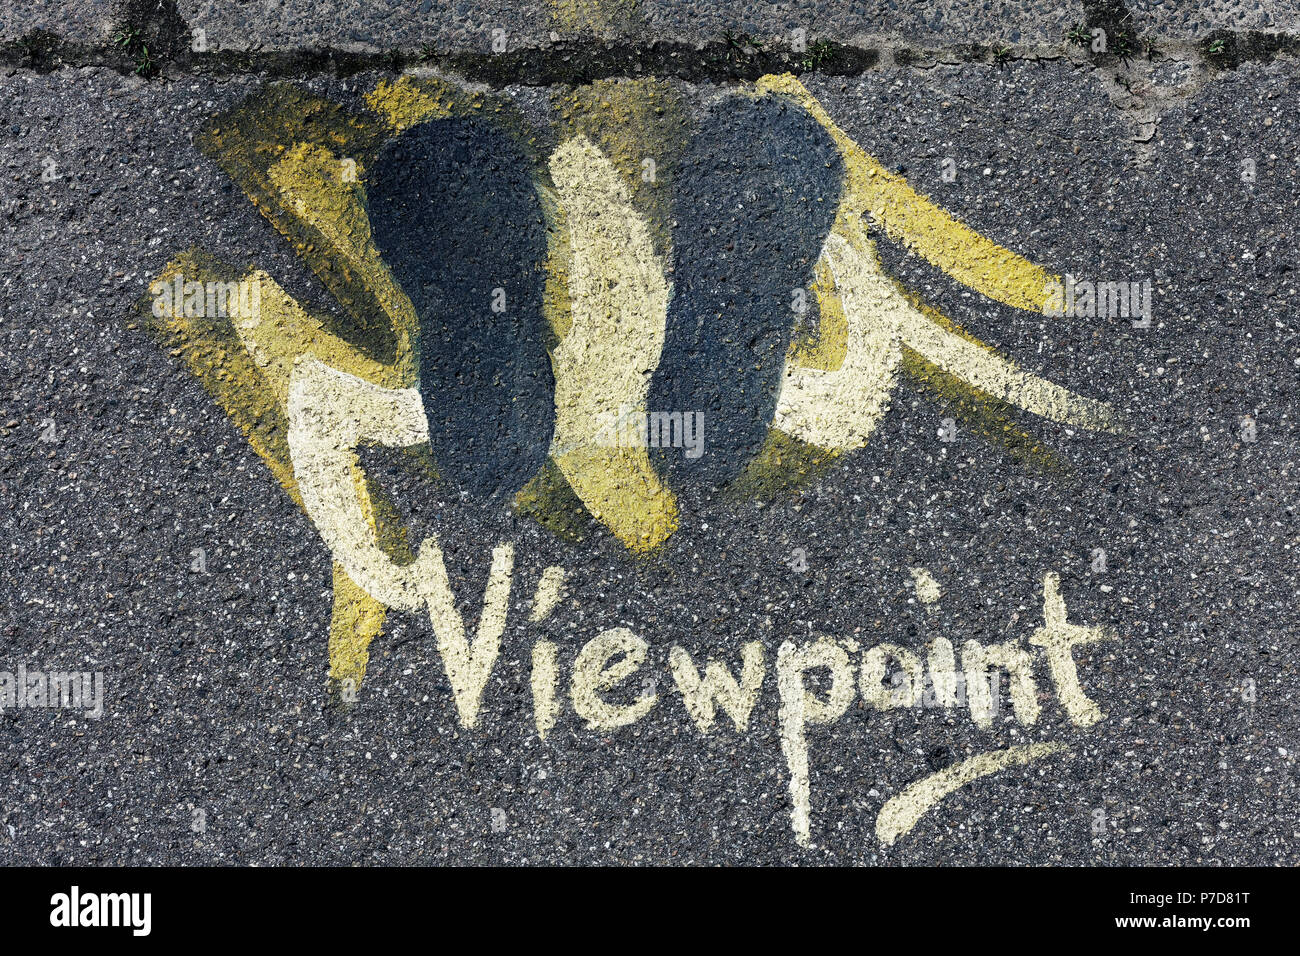 Viewpoint, marked position for viewing a 3-D painting on the asphalt, Rhine Side Gallery Uerdingen, Krefeld, NRW, Germany Stock Photo